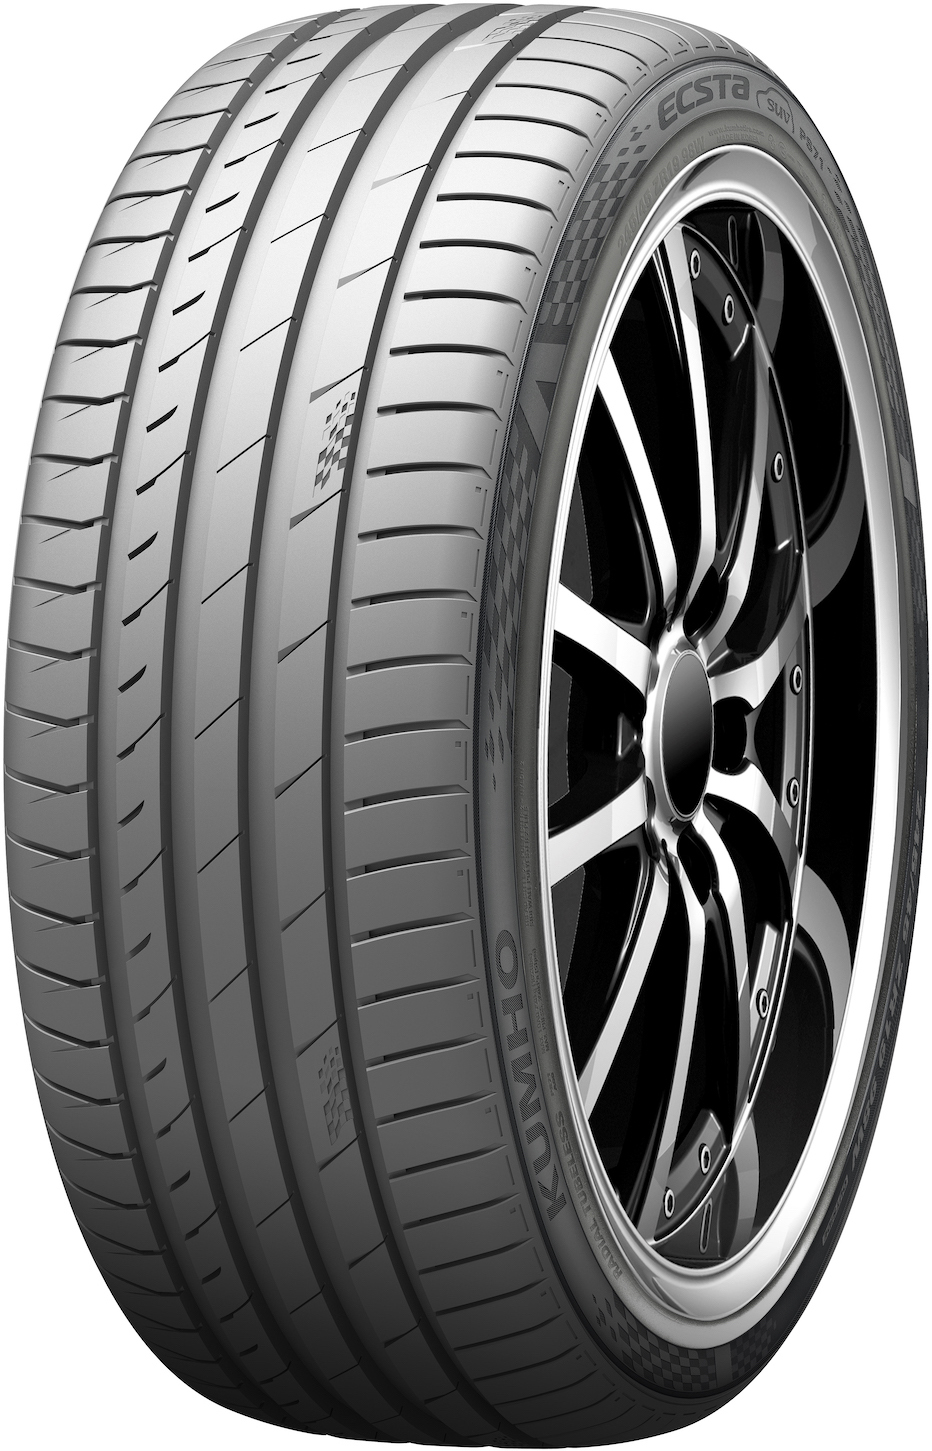 Anvelope auto KUMHO Ecsta PS71 SUV 265/40 R21 105Y